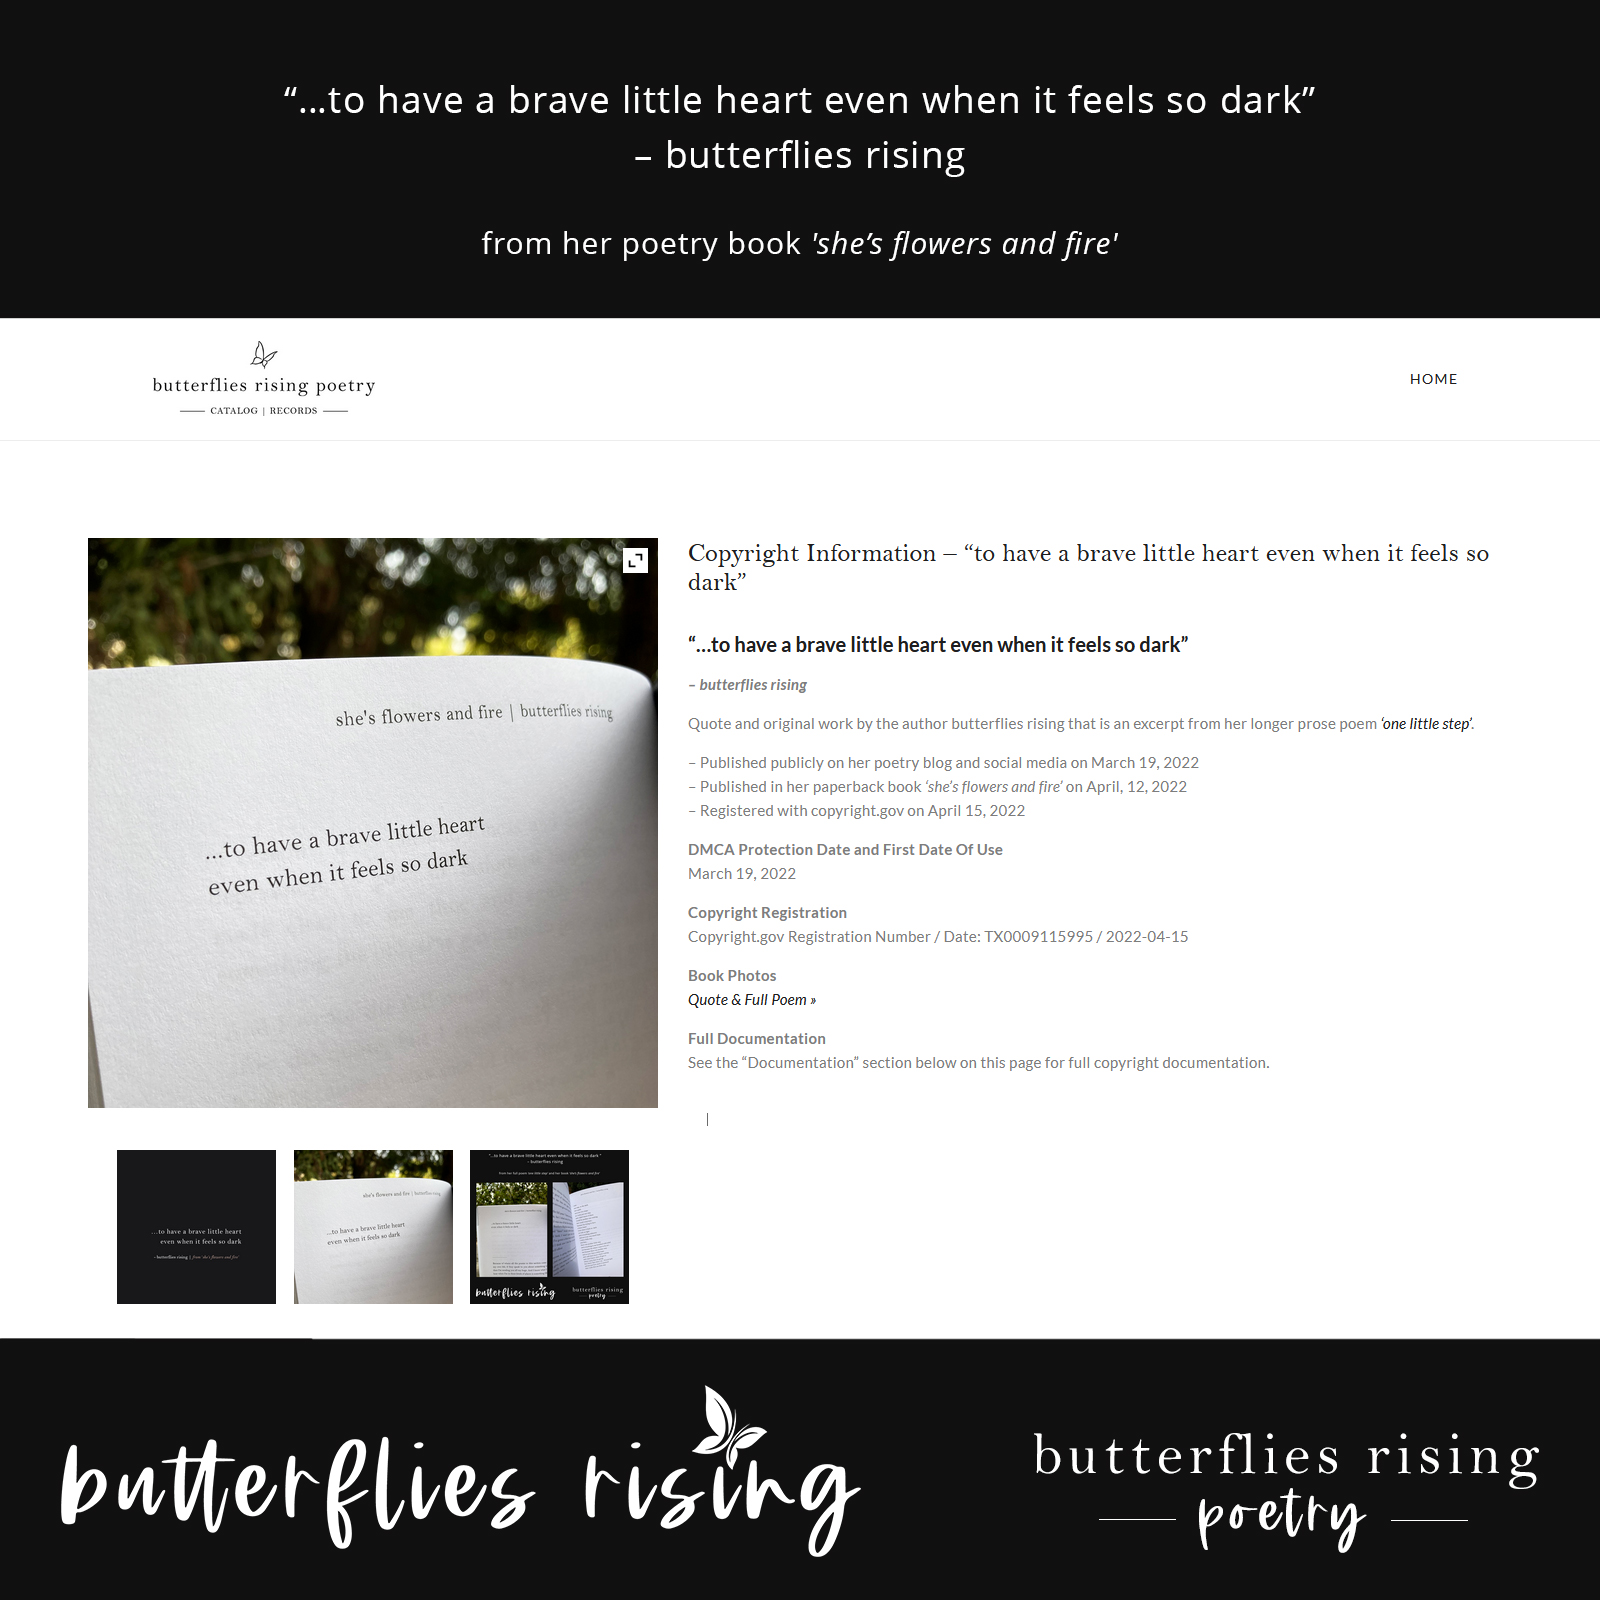 ...to have a brave little heart even when it feels so dark – butterflies rising